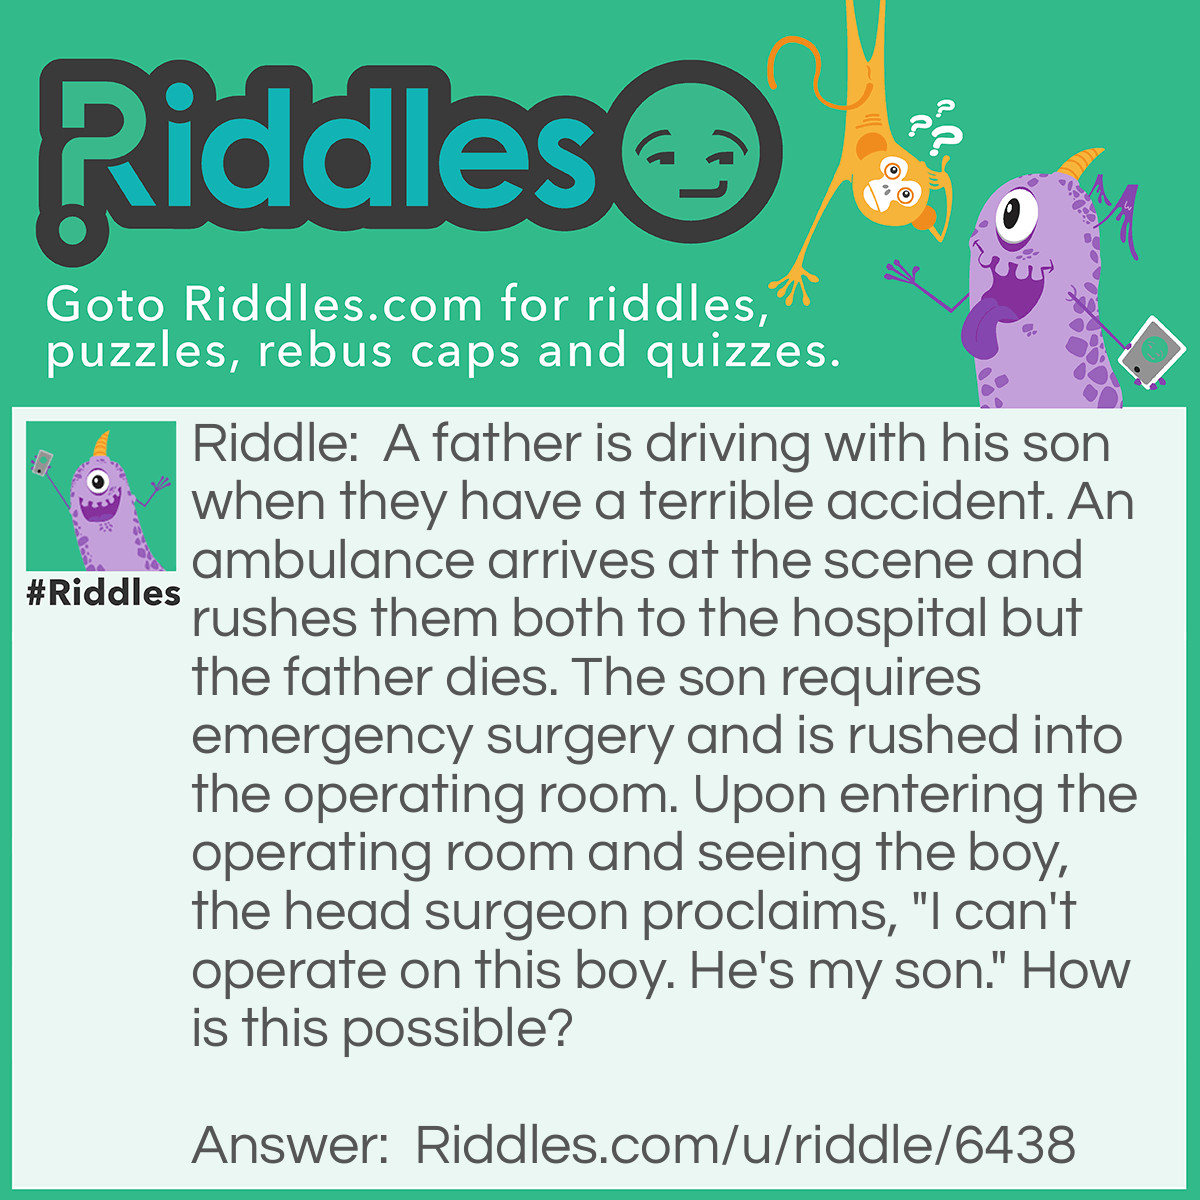 Riddle: A father is driving with his son when they have a terrible accident. An ambulance arrives at the scene and rushes them both to the hospital but the father dies. The son requires emergency surgery and is rushed into the operating room. Upon entering the operating room and seeing the boy, the head surgeon proclaims, "I can't operate on this boy. He's my son." How is this possible? Answer: The surgeon is the boys mother.